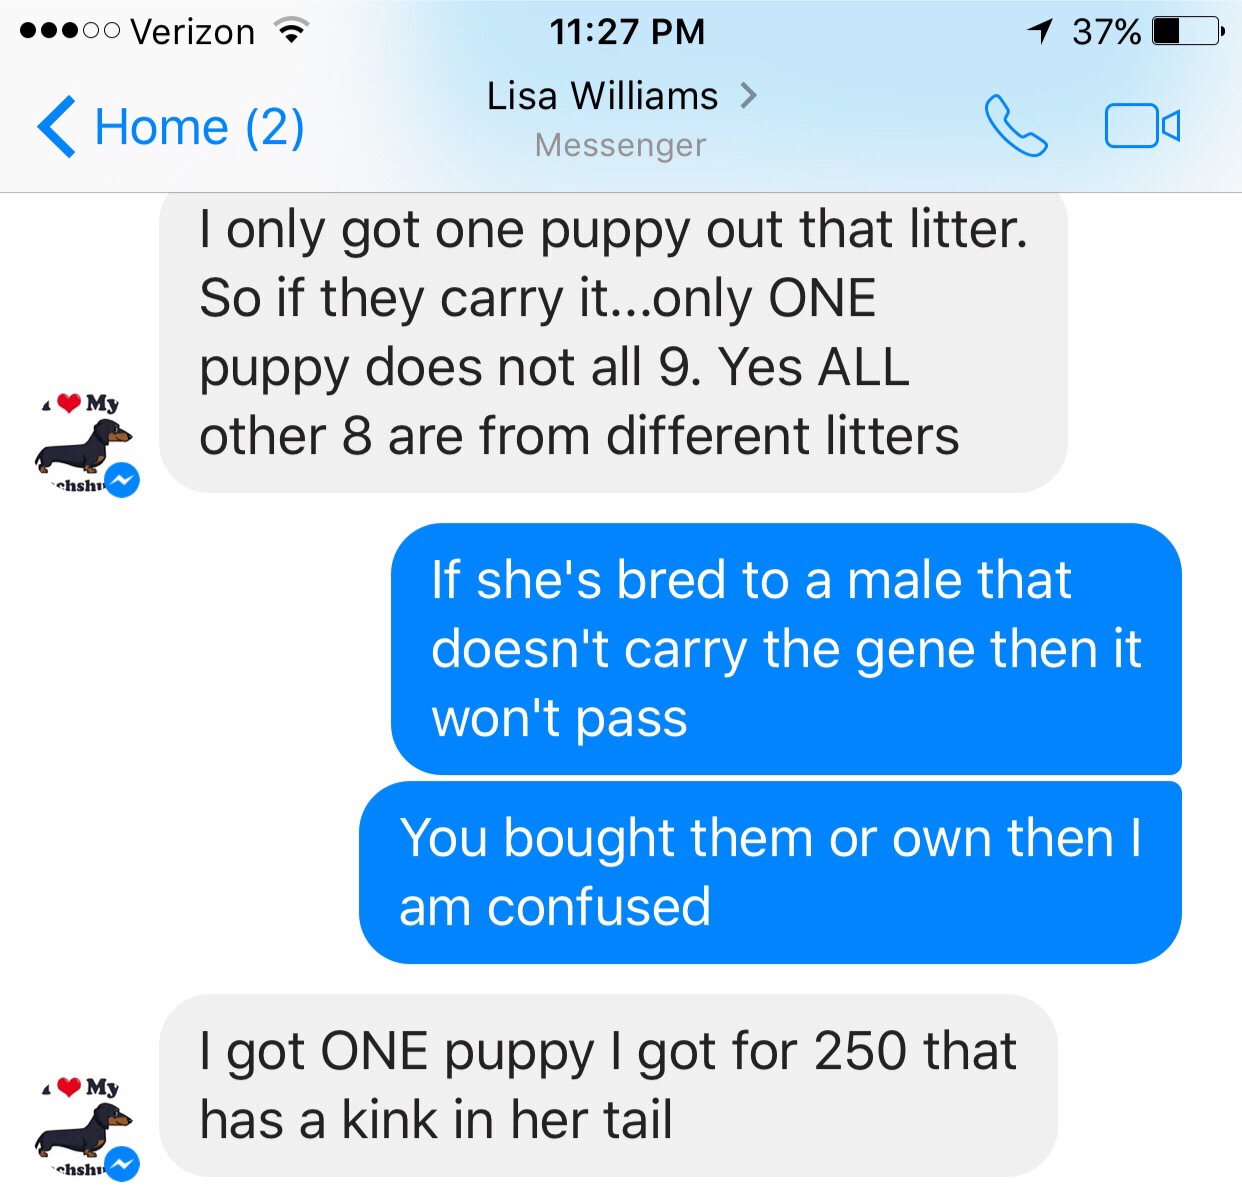 Screenshot continued on puppies of Lisa Williams 

I tried to help educate her & later was turned on leading to her report of lies about me 